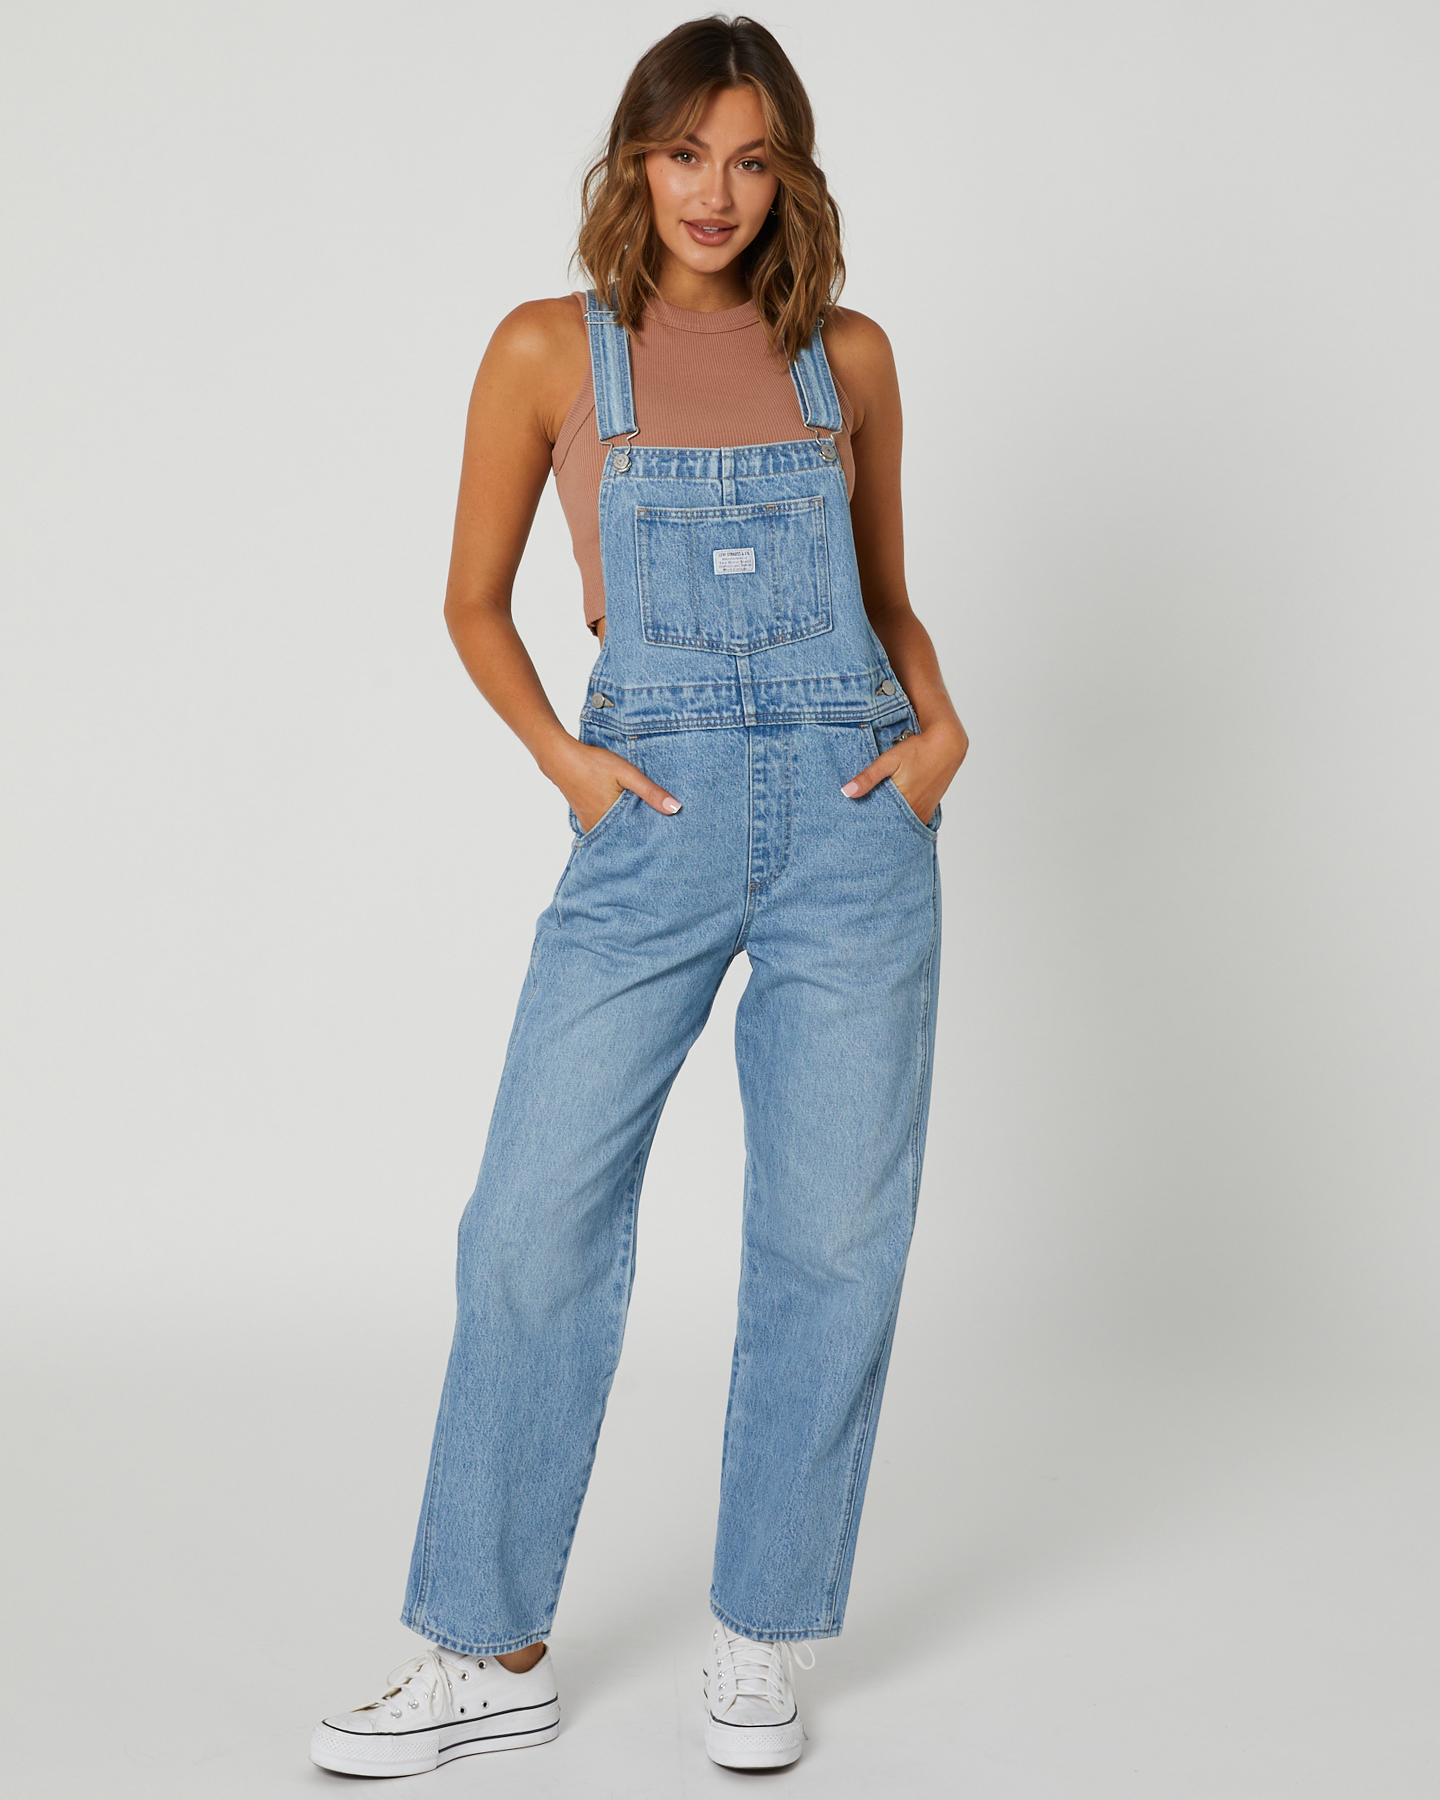 Levi's Vintage Overall - What A Delight | SurfStitch